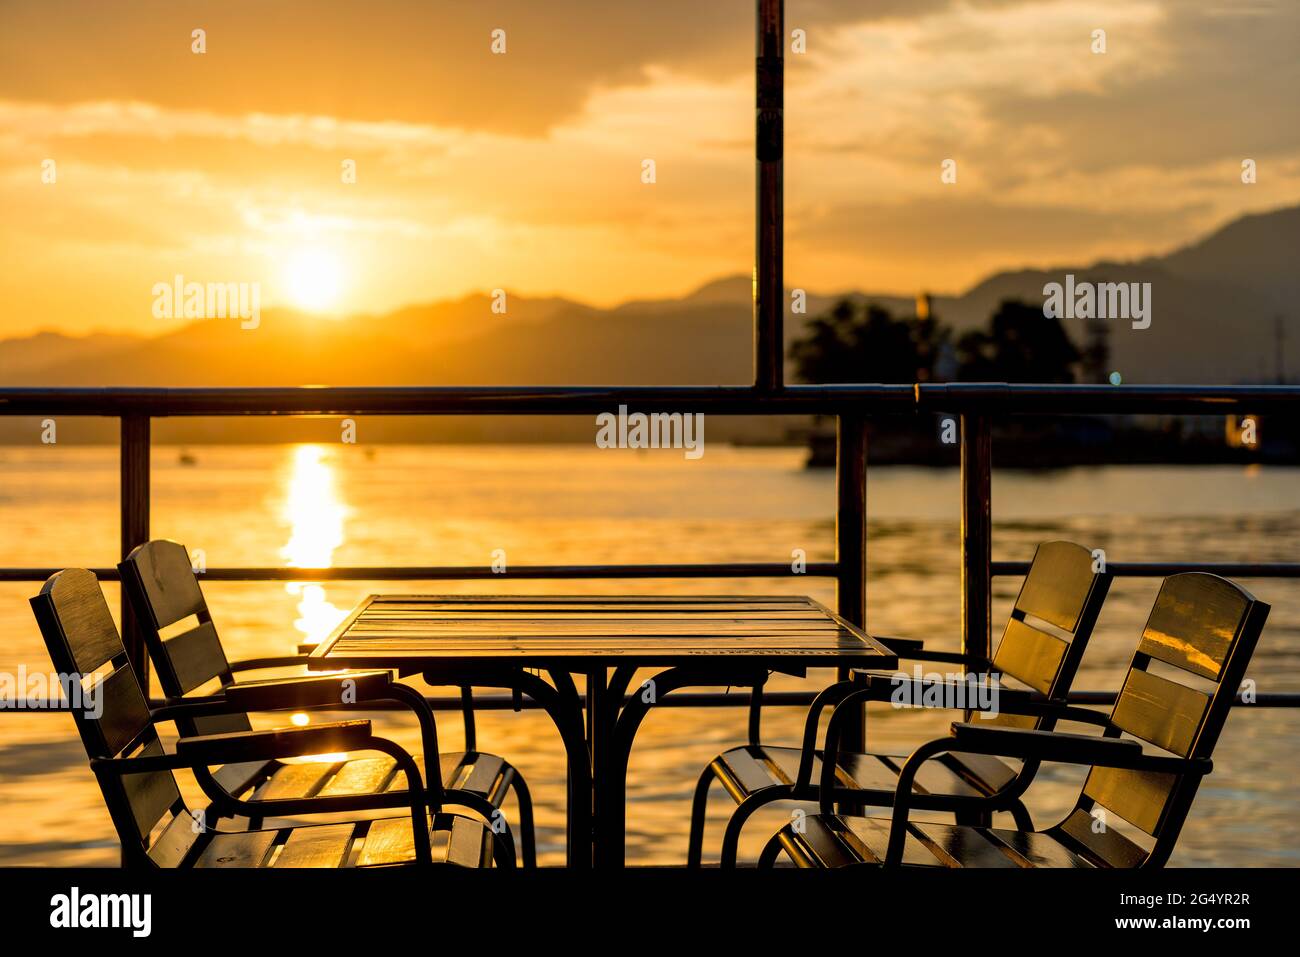 A table in a cafe by the sea during sunset in orange Stock Photo